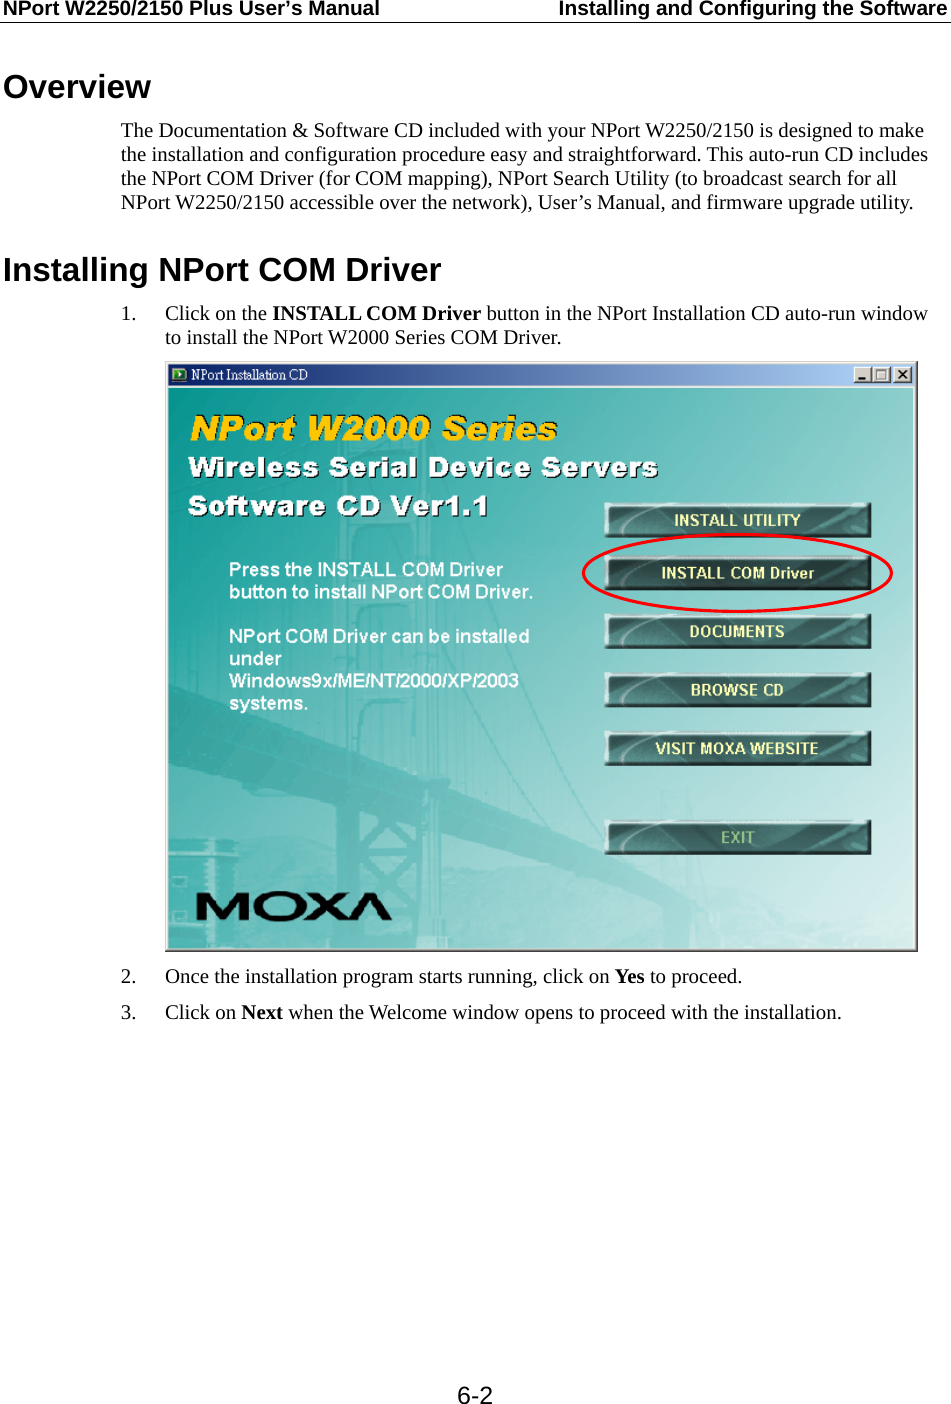 NPort W2250/2150 Plus User’s Manual  Installing and Configuring the Software  6-2Overview The Documentation &amp; Software CD included with your NPort W2250/2150 is designed to make the installation and configuration procedure easy and straightforward. This auto-run CD includes the NPort COM Driver (for COM mapping), NPort Search Utility (to broadcast search for all NPort W2250/2150 accessible over the network), User’s Manual, and firmware upgrade utility.  Installing NPort COM Driver 1. Click on the INSTALL COM Driver button in the NPort Installation CD auto-run window to install the NPort W2000 Series COM Driver.  2. Once the installation program starts running, click on Yes to proceed. 3. Click on Next when the Welcome window opens to proceed with the installation. 